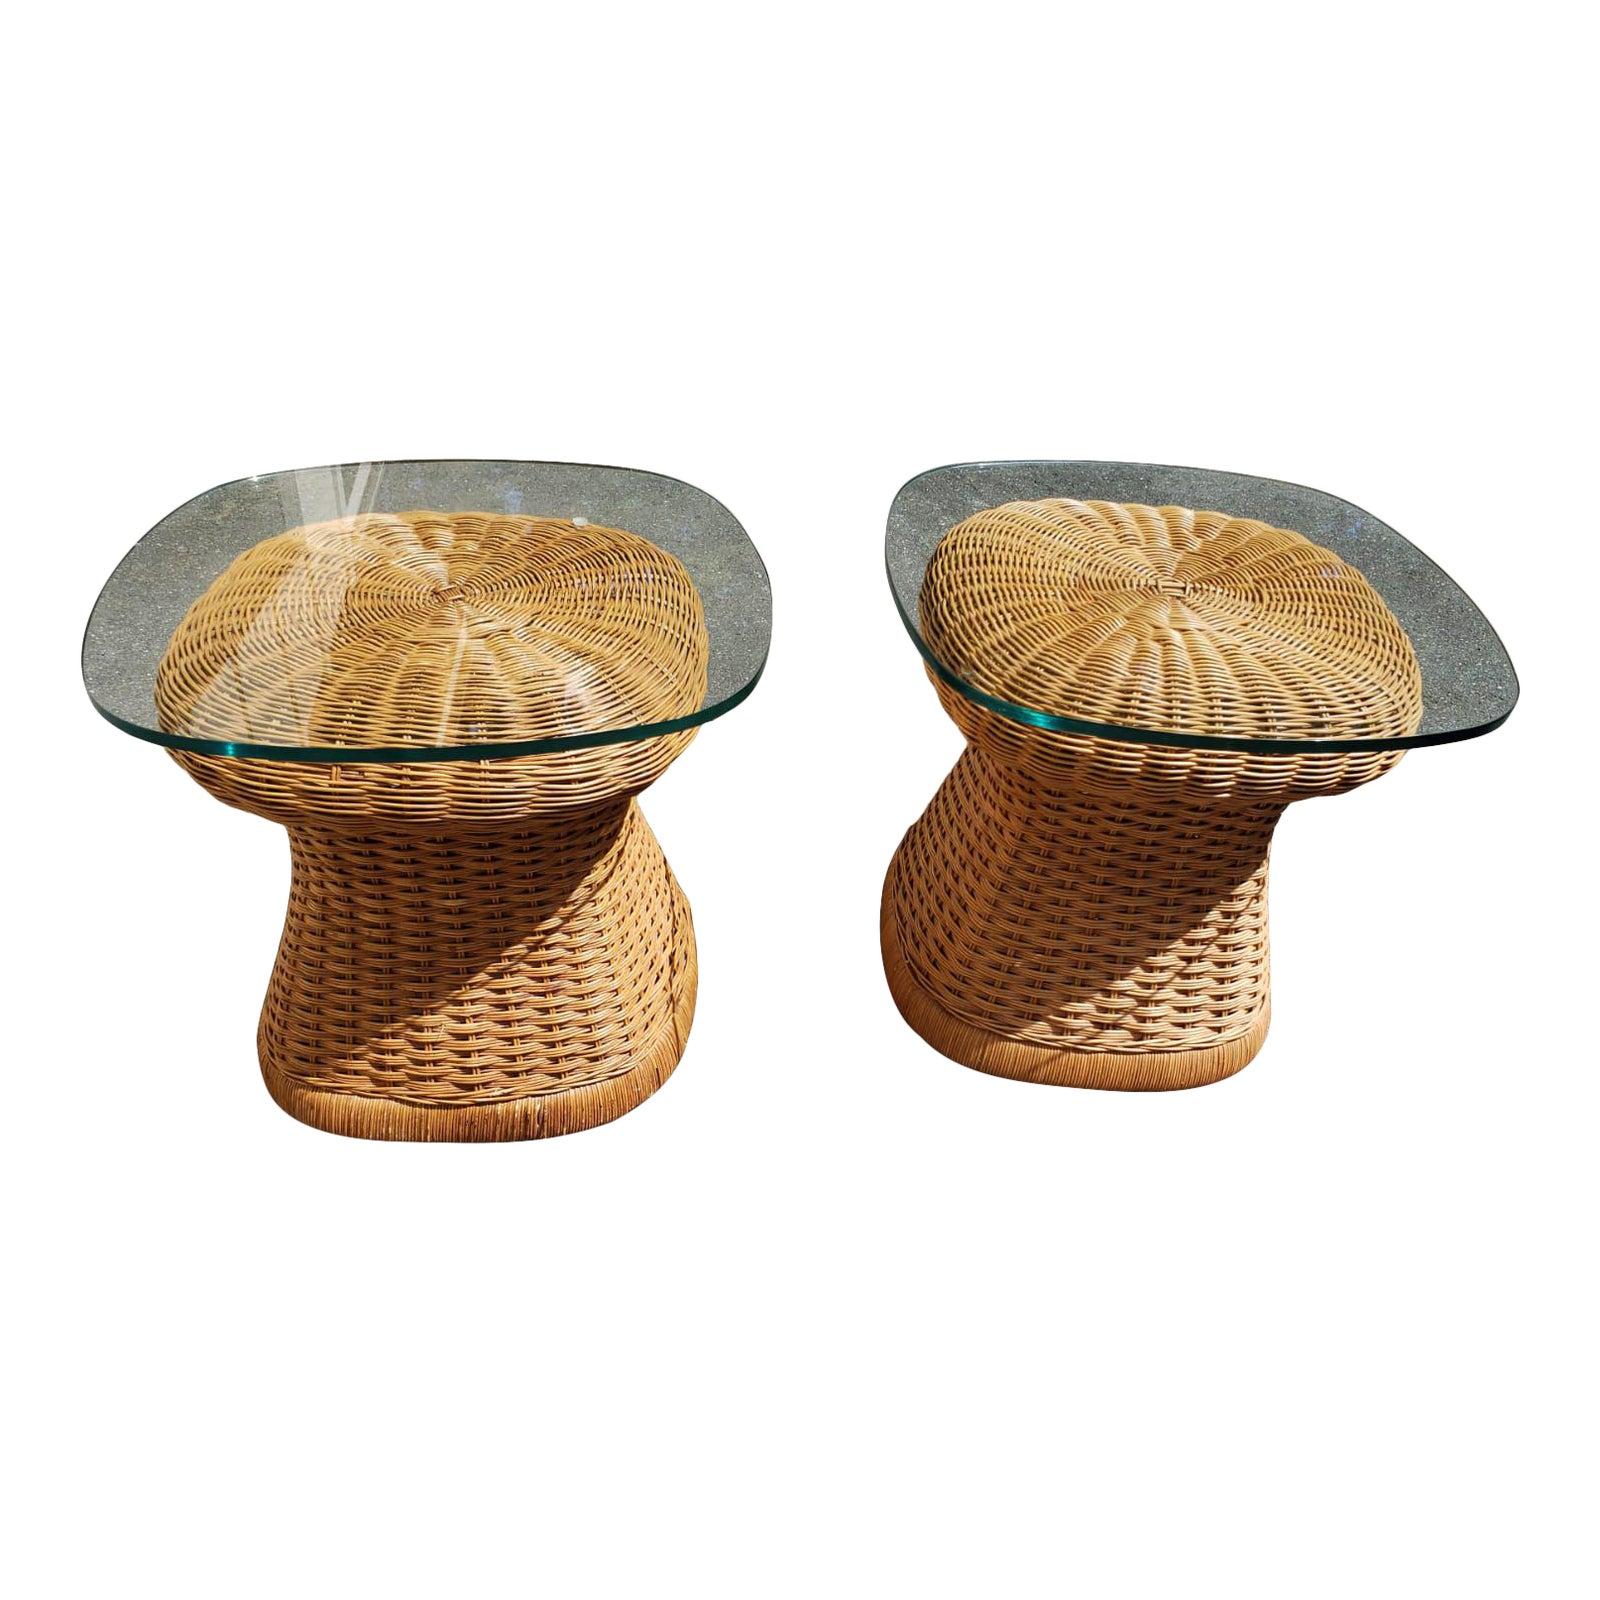 1960s Mid-Century Modern Wicker Side Tables With Tempered Glass Tops, a Pair For Sale